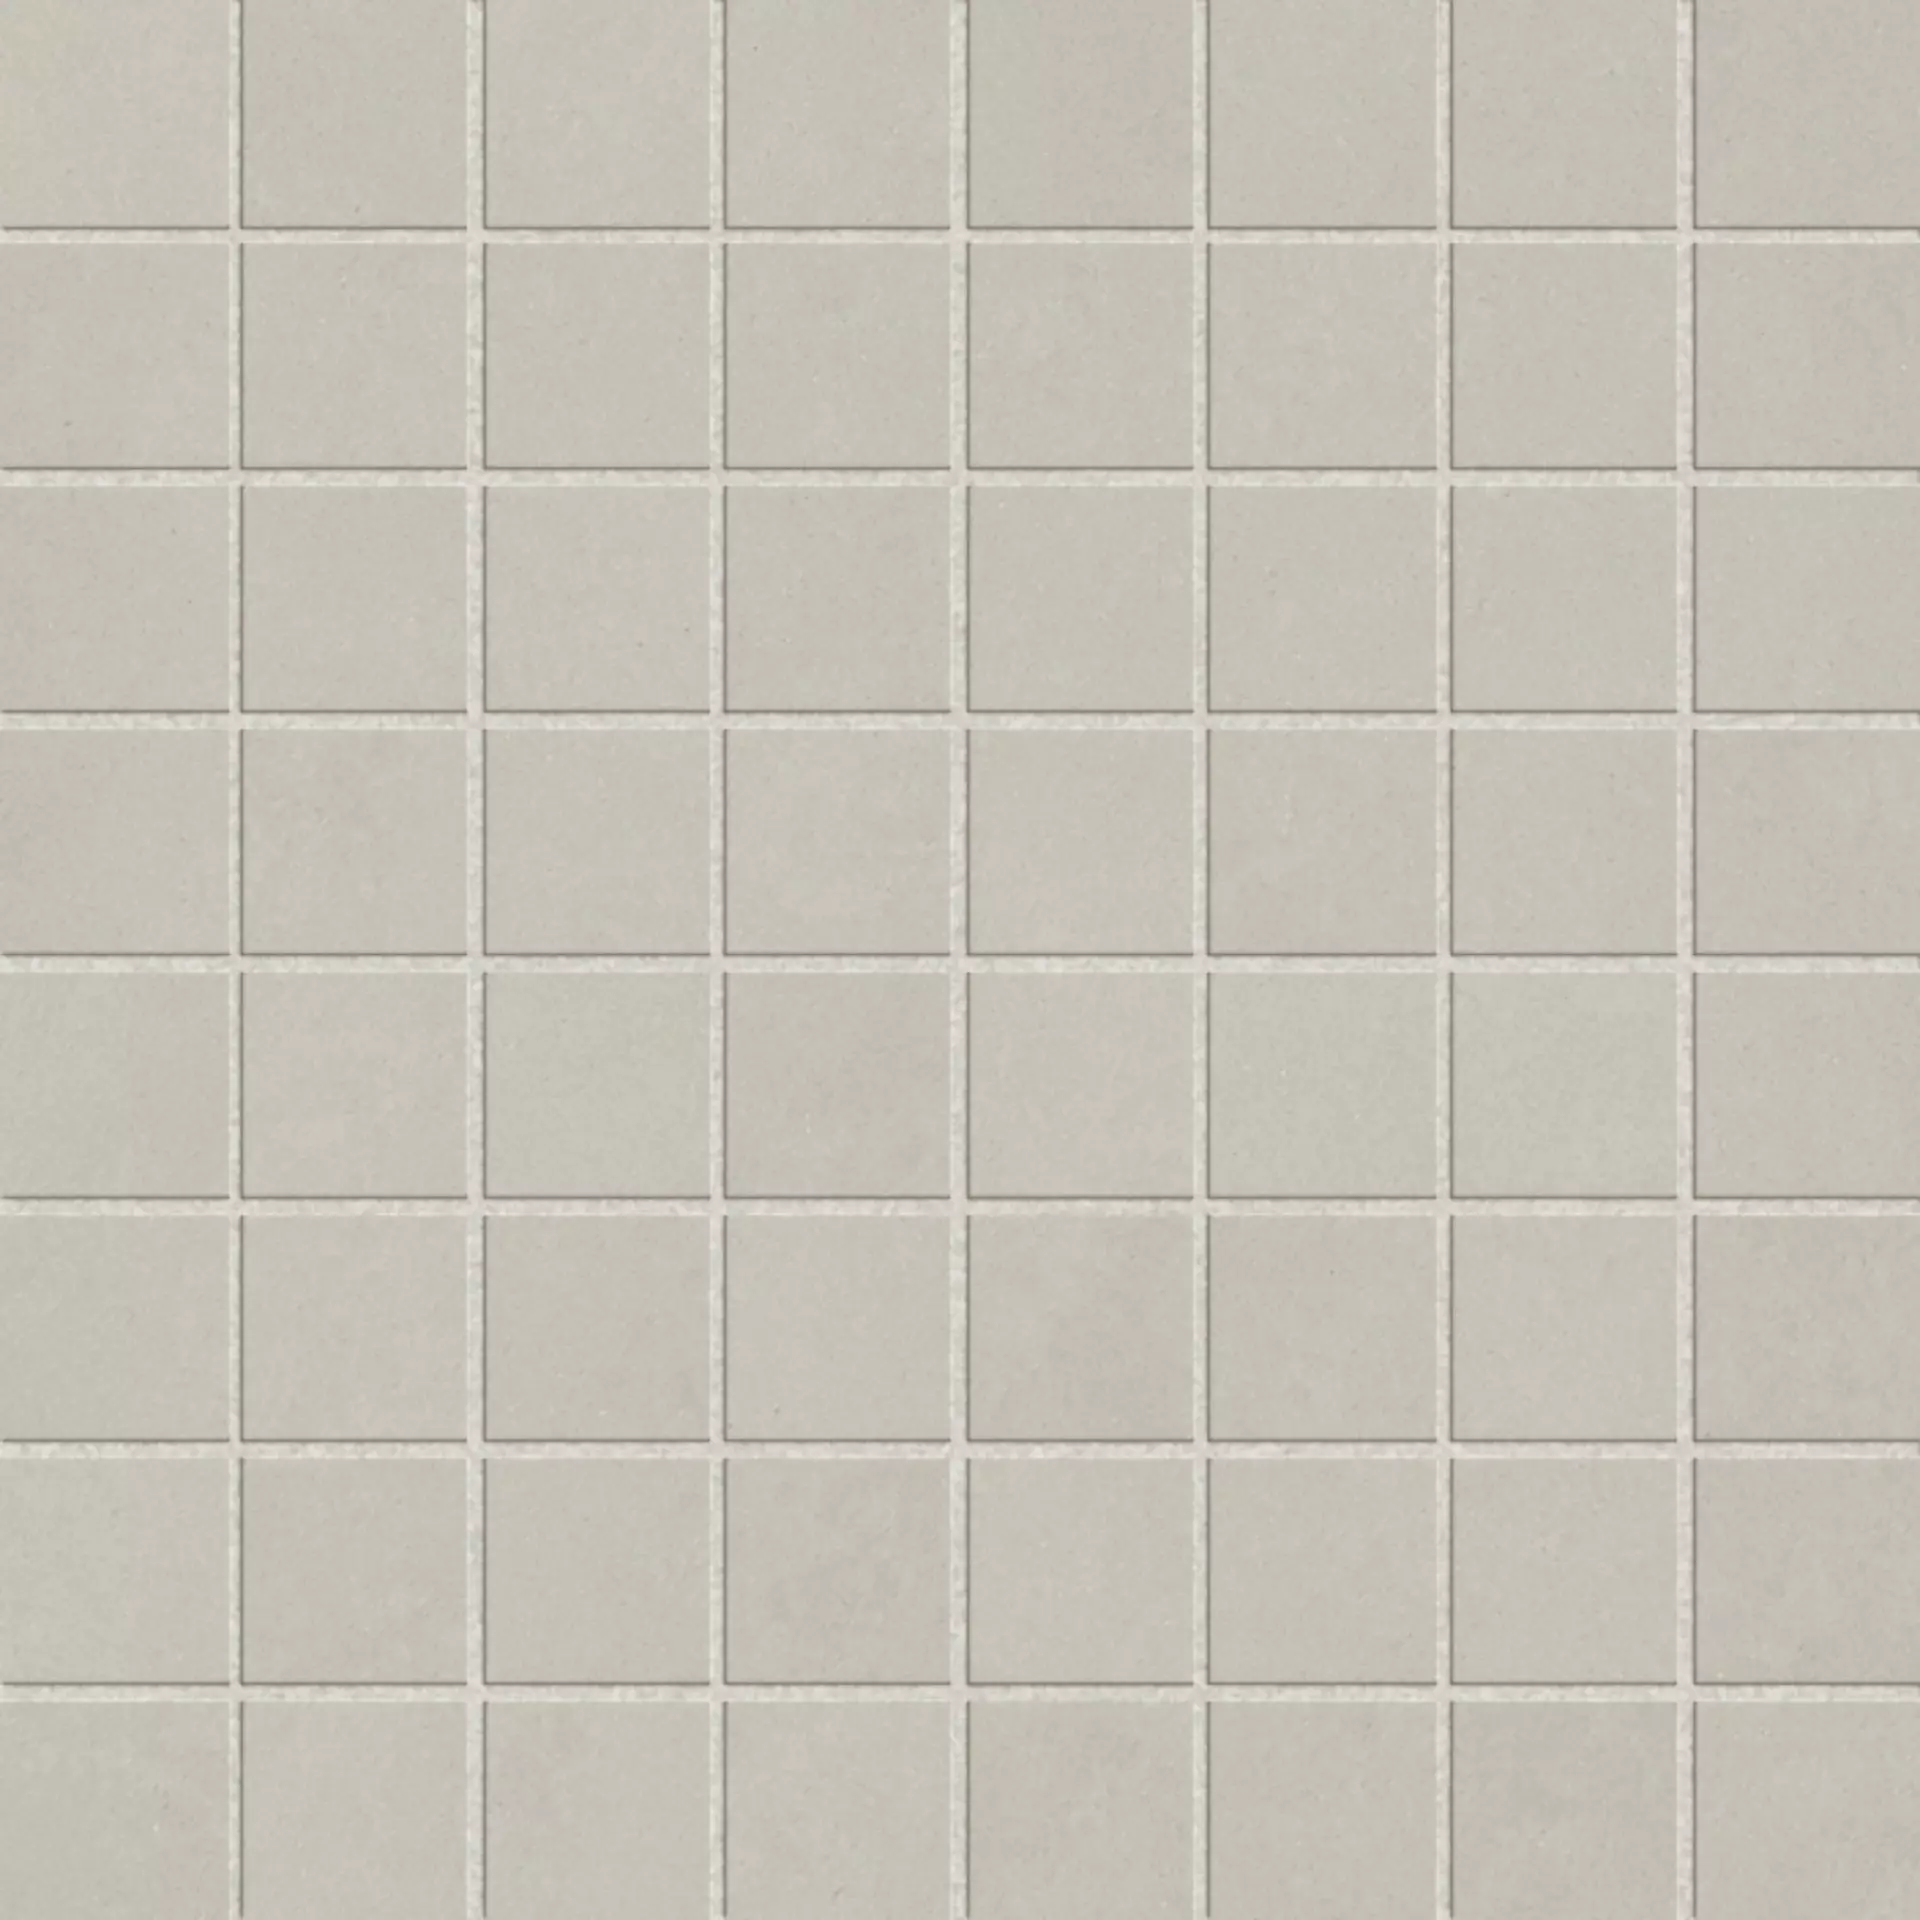 Margres Time 2.0 Silver Antislip Antibacterial Mosaic 3,5x3,5 B25M33T267F 30x30cm rectified 10,5mm